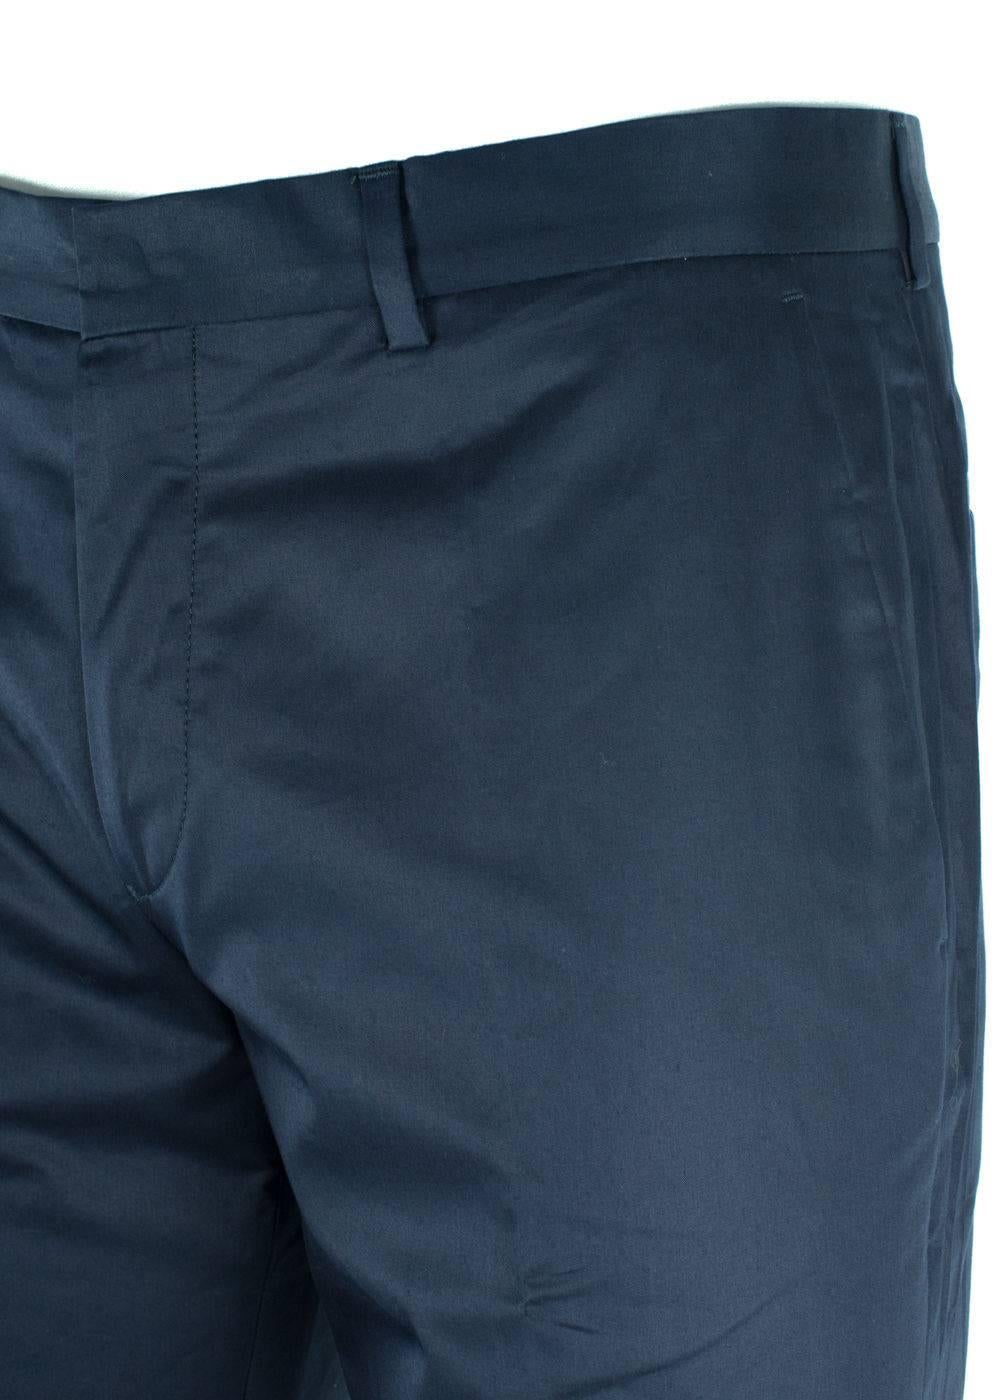 Brand New Givenchy Men's Trousers
Original Tag
Retails in Stores & Online for $390
Men's Size E54 / US38 Fits True to Size

Givenchy's take on a classic pair of navy trousers for those professional settings and important events. Made with 100%